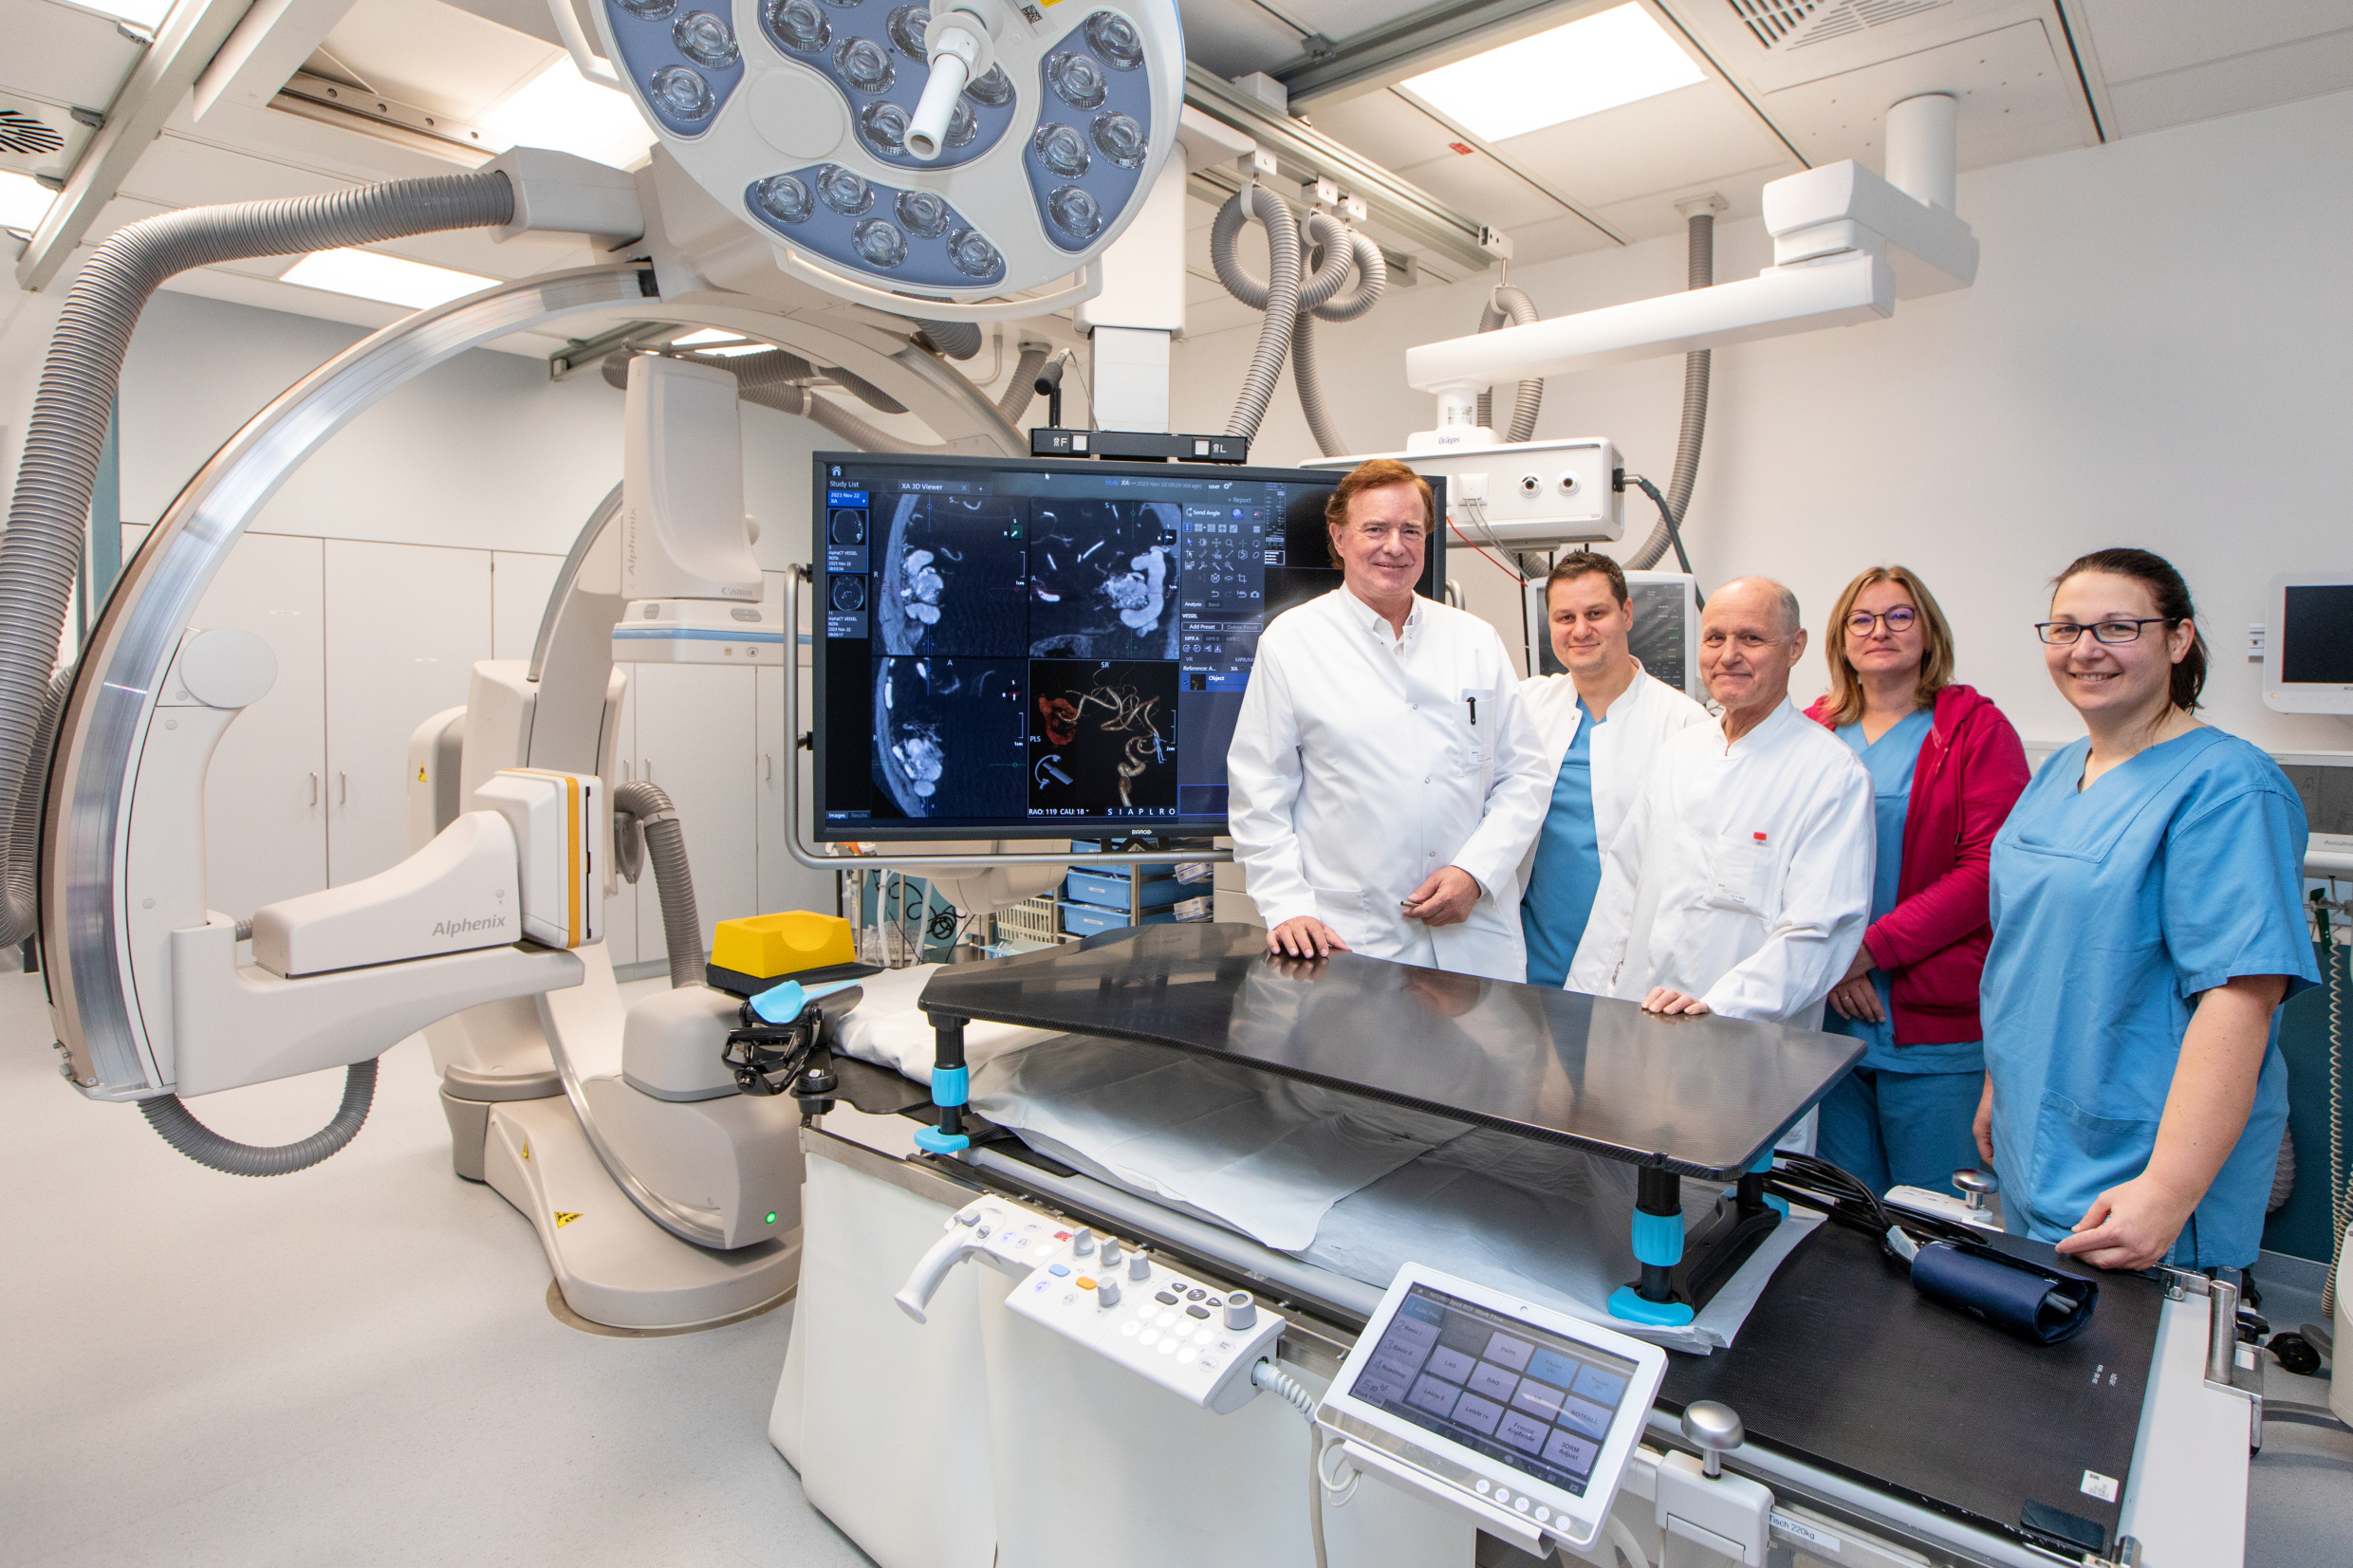 Professor Lanfermann (left) and his team are delighted about the new angiography equipment. Copyright: Karin Kaiser / MHH